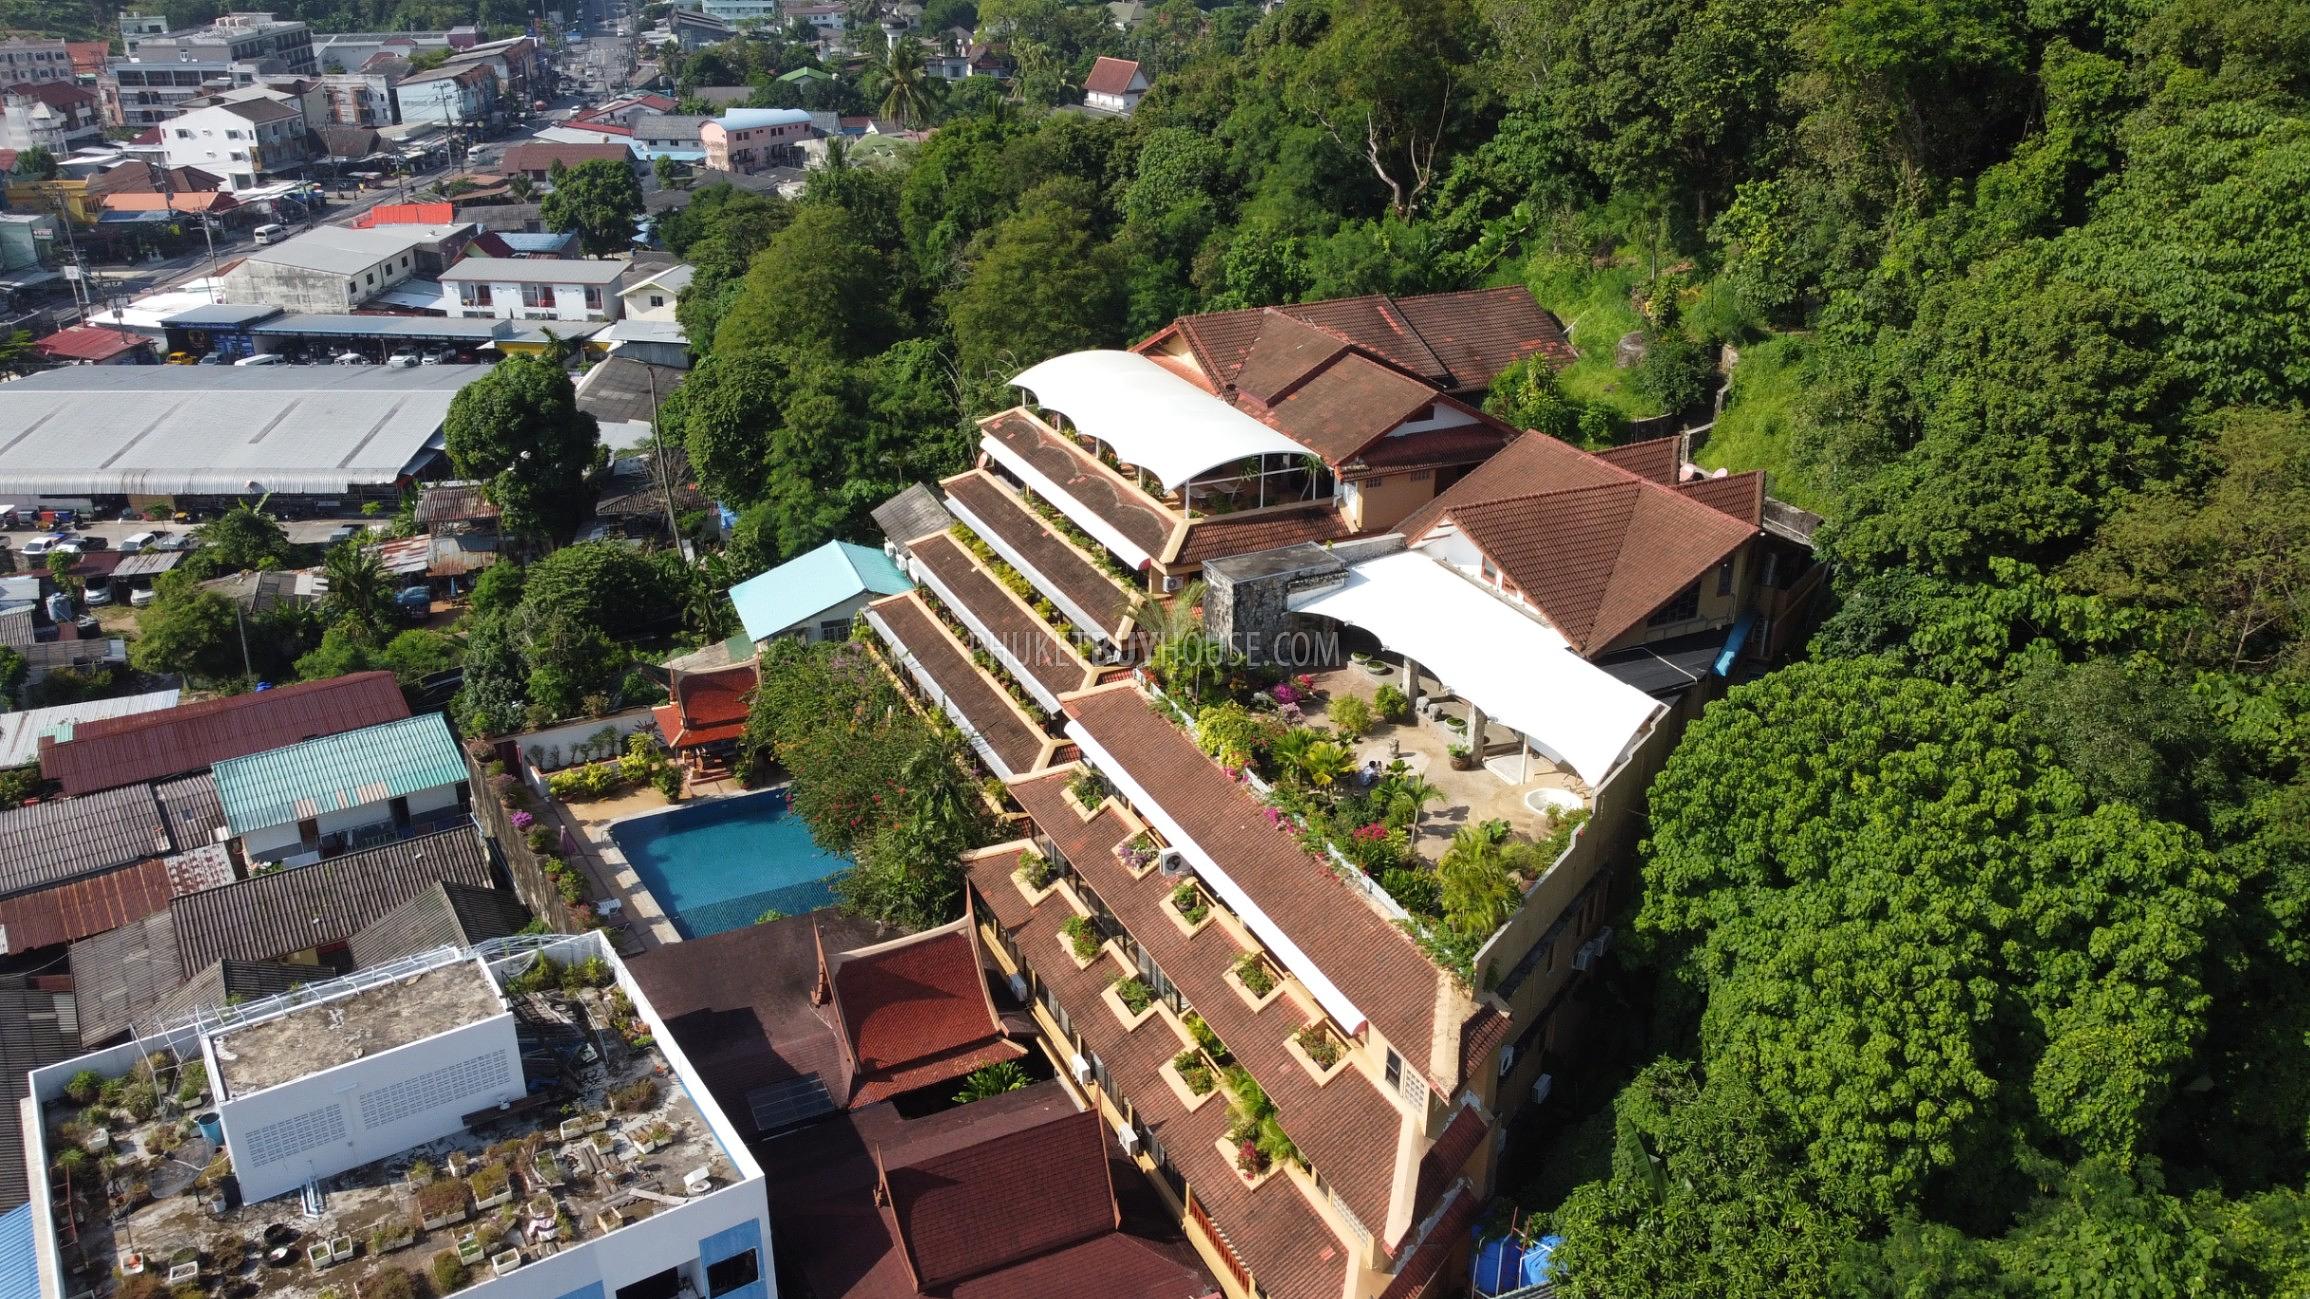 KAT21964: Sensational Seaview Penthouse with Three Bedrooms for Sale - Just a 10-Minute Stroll to Kata Beach. Photo #37